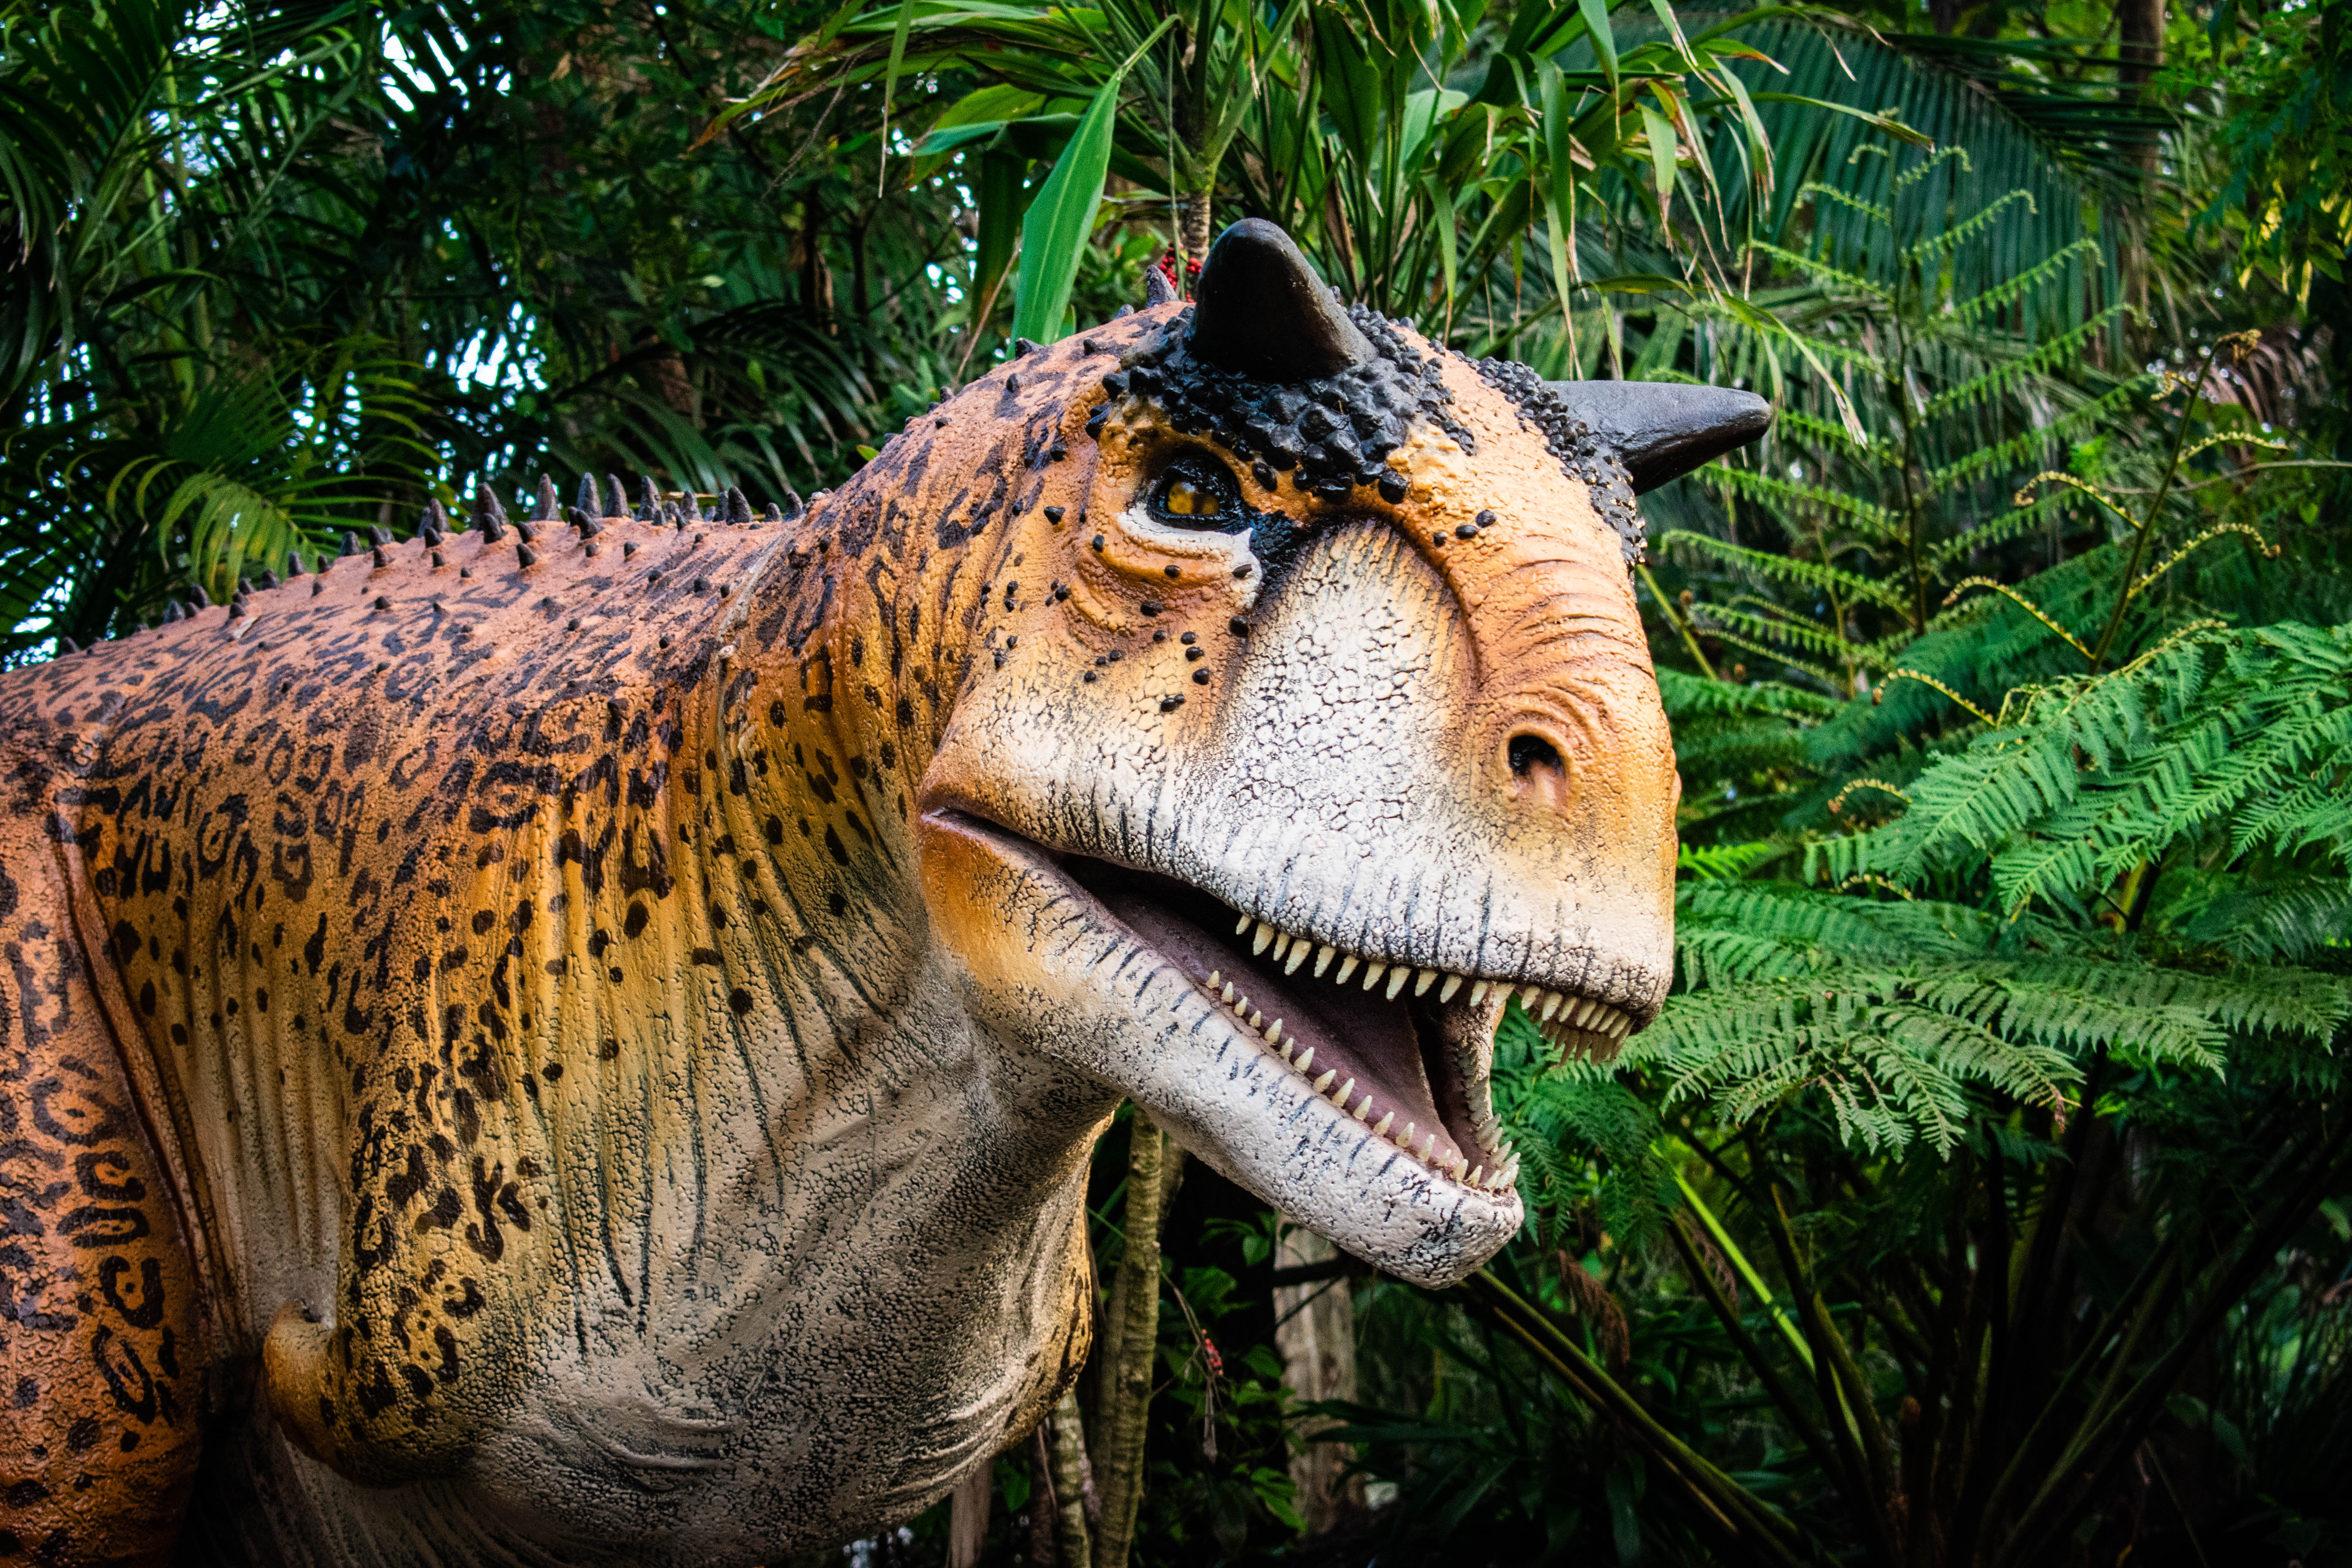 Dinosaurs are coming back to the zoo this summer